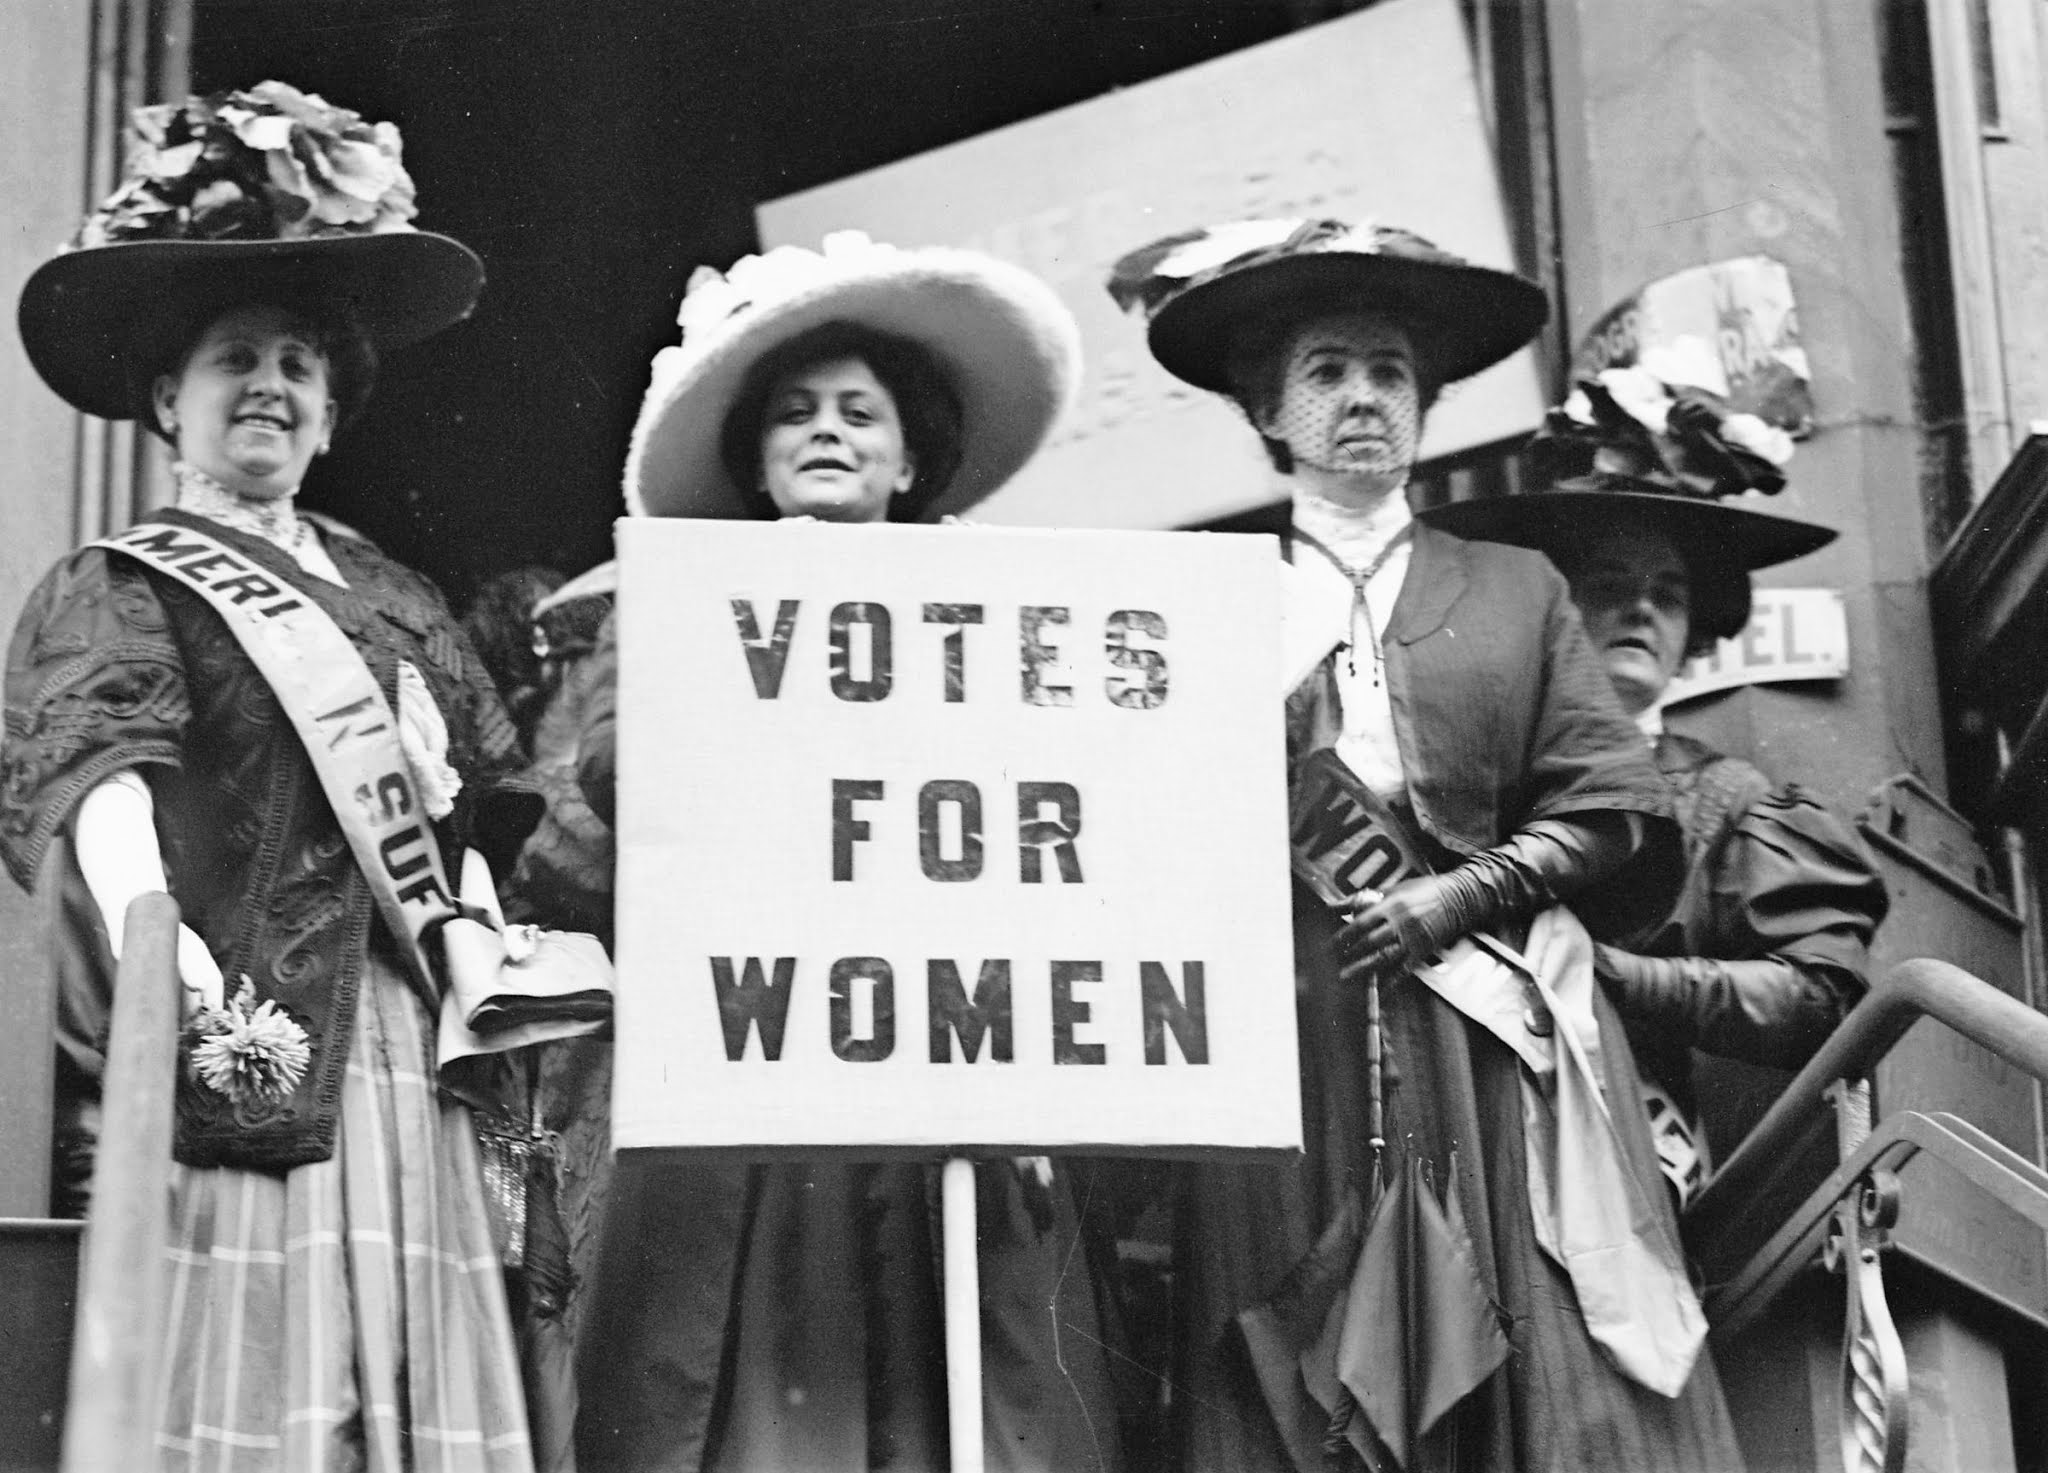 Celebrating 100 Years of Women's Suffrage